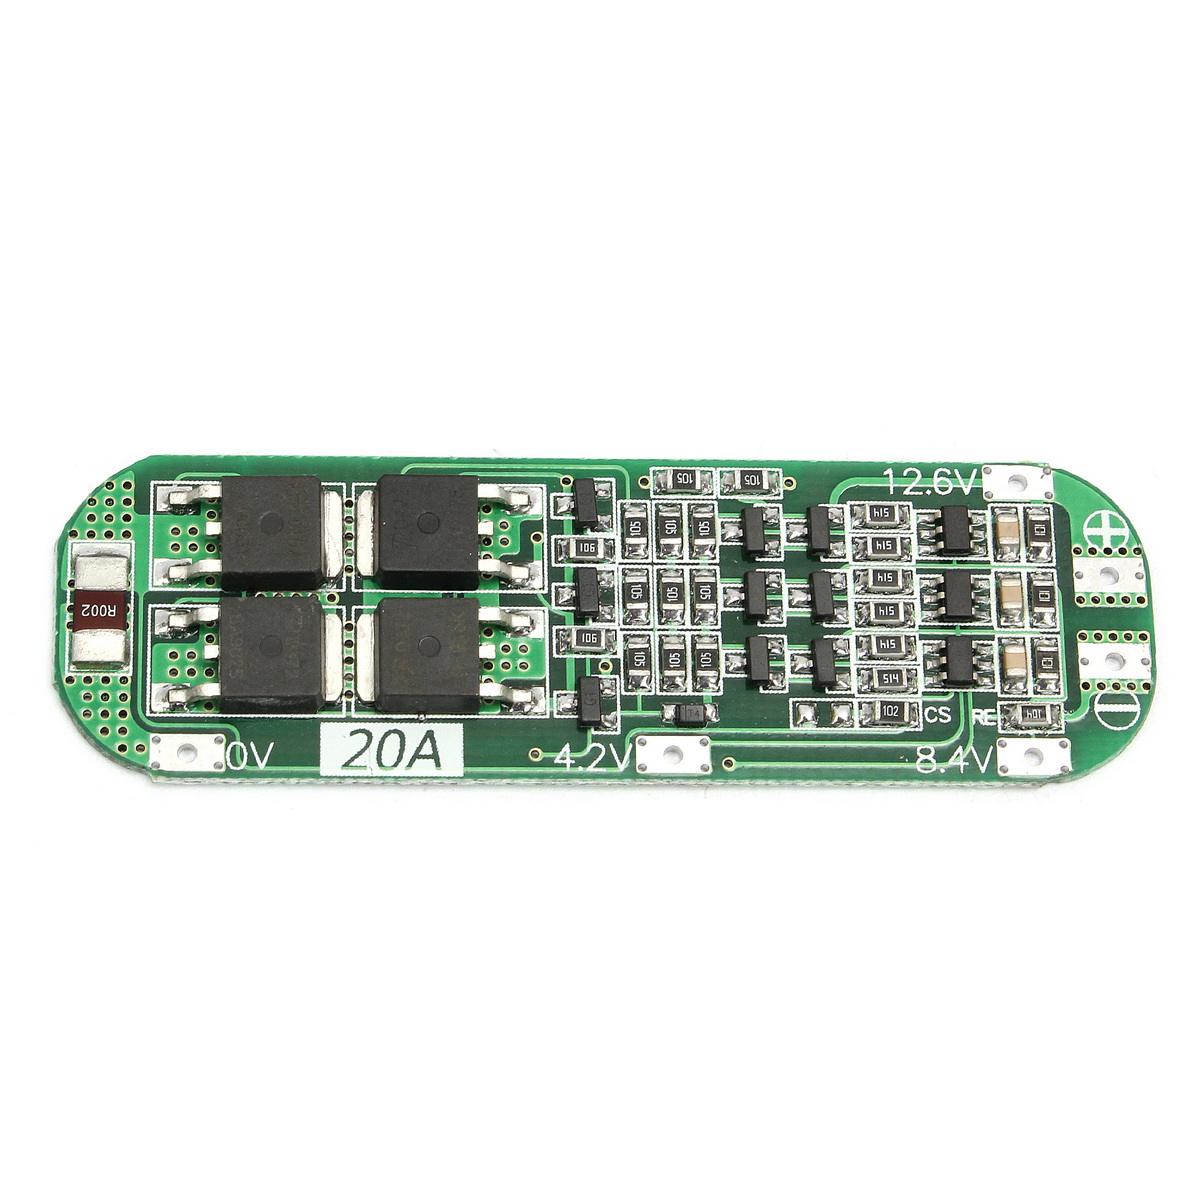 10pcs-3S-20A-Li-ion-Lithium-Battery-18650-Charger-PCB-BMS-Protection-Board-126V-Cell-1120989